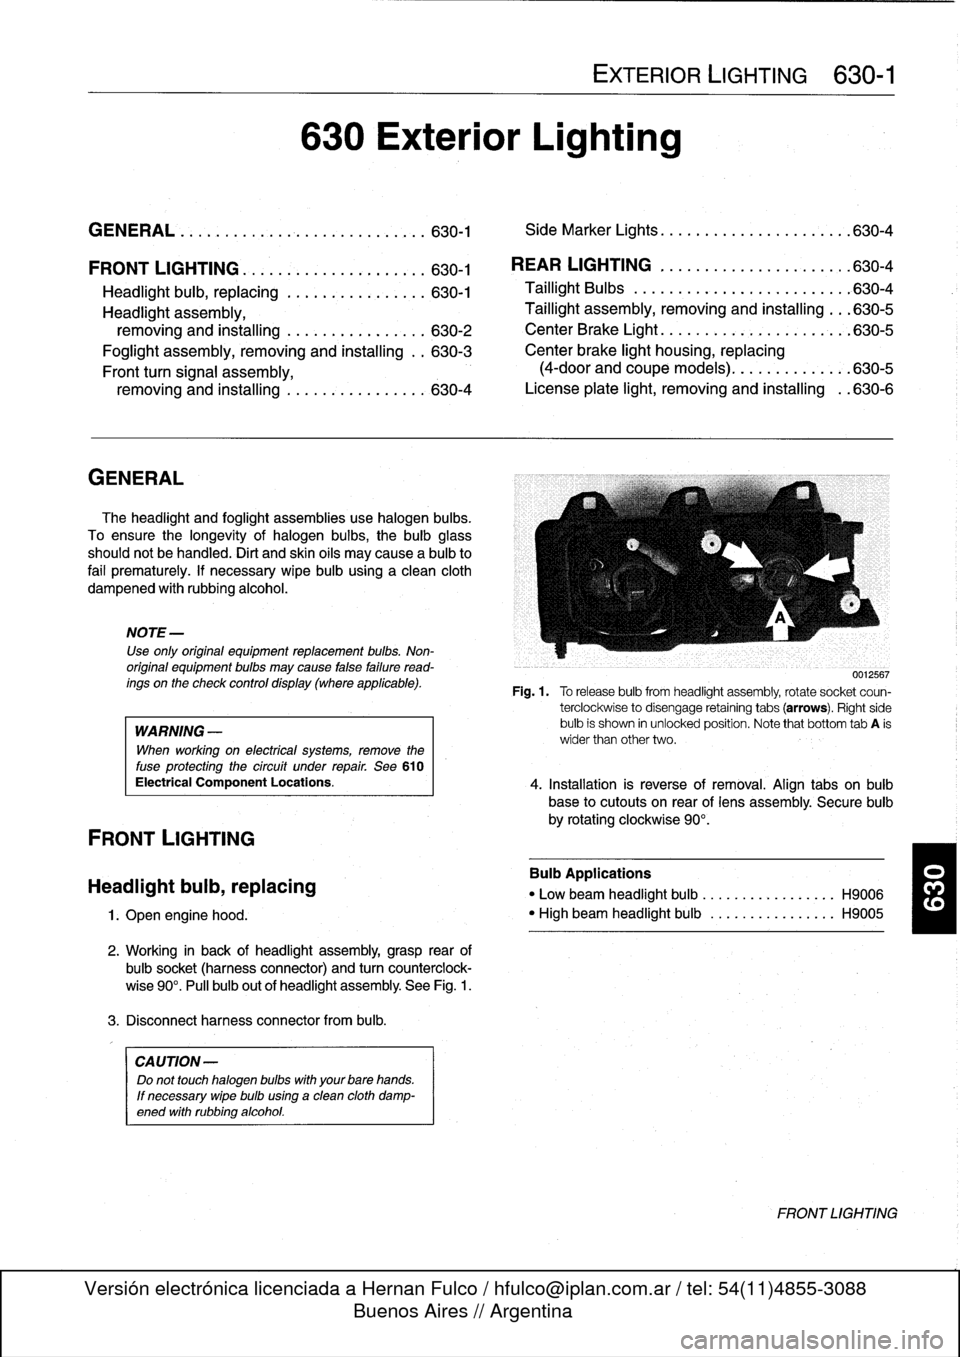 BMW 323i 1992 E36 Workshop Manual 
FRONT
LIGHTING
.
...........
.
....
.
.
.
.
630-1

Headlight
buib,
replacing
............
.
.
.
.
630-1
Headlight
assembly,

removing
and
installing
.......
.
....
.
.
.
.
630-2

Foglight
assembly,
r